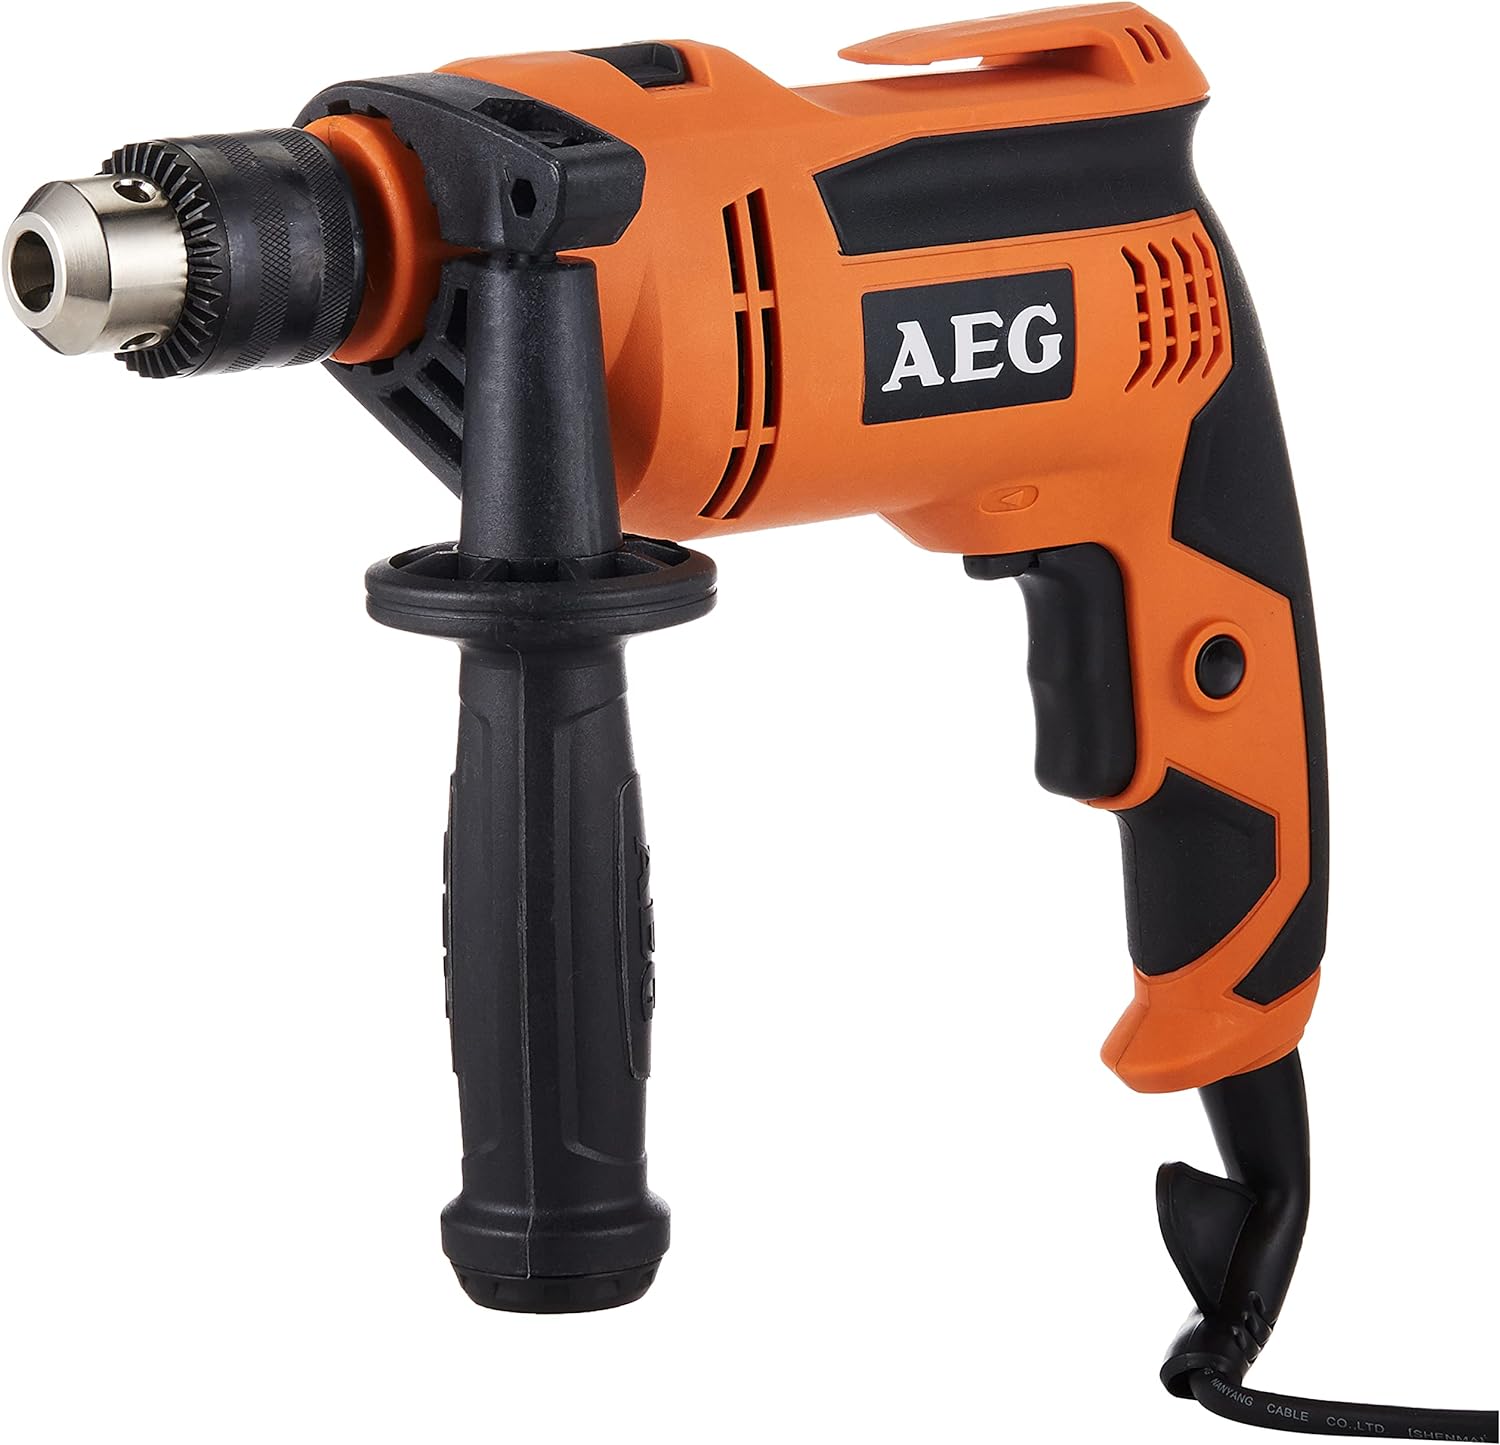 AEG Percussion Drill 13mm 580W - SBE580R | Supply Master Accra, Ghana Drill Buy Tools hardware Building materials